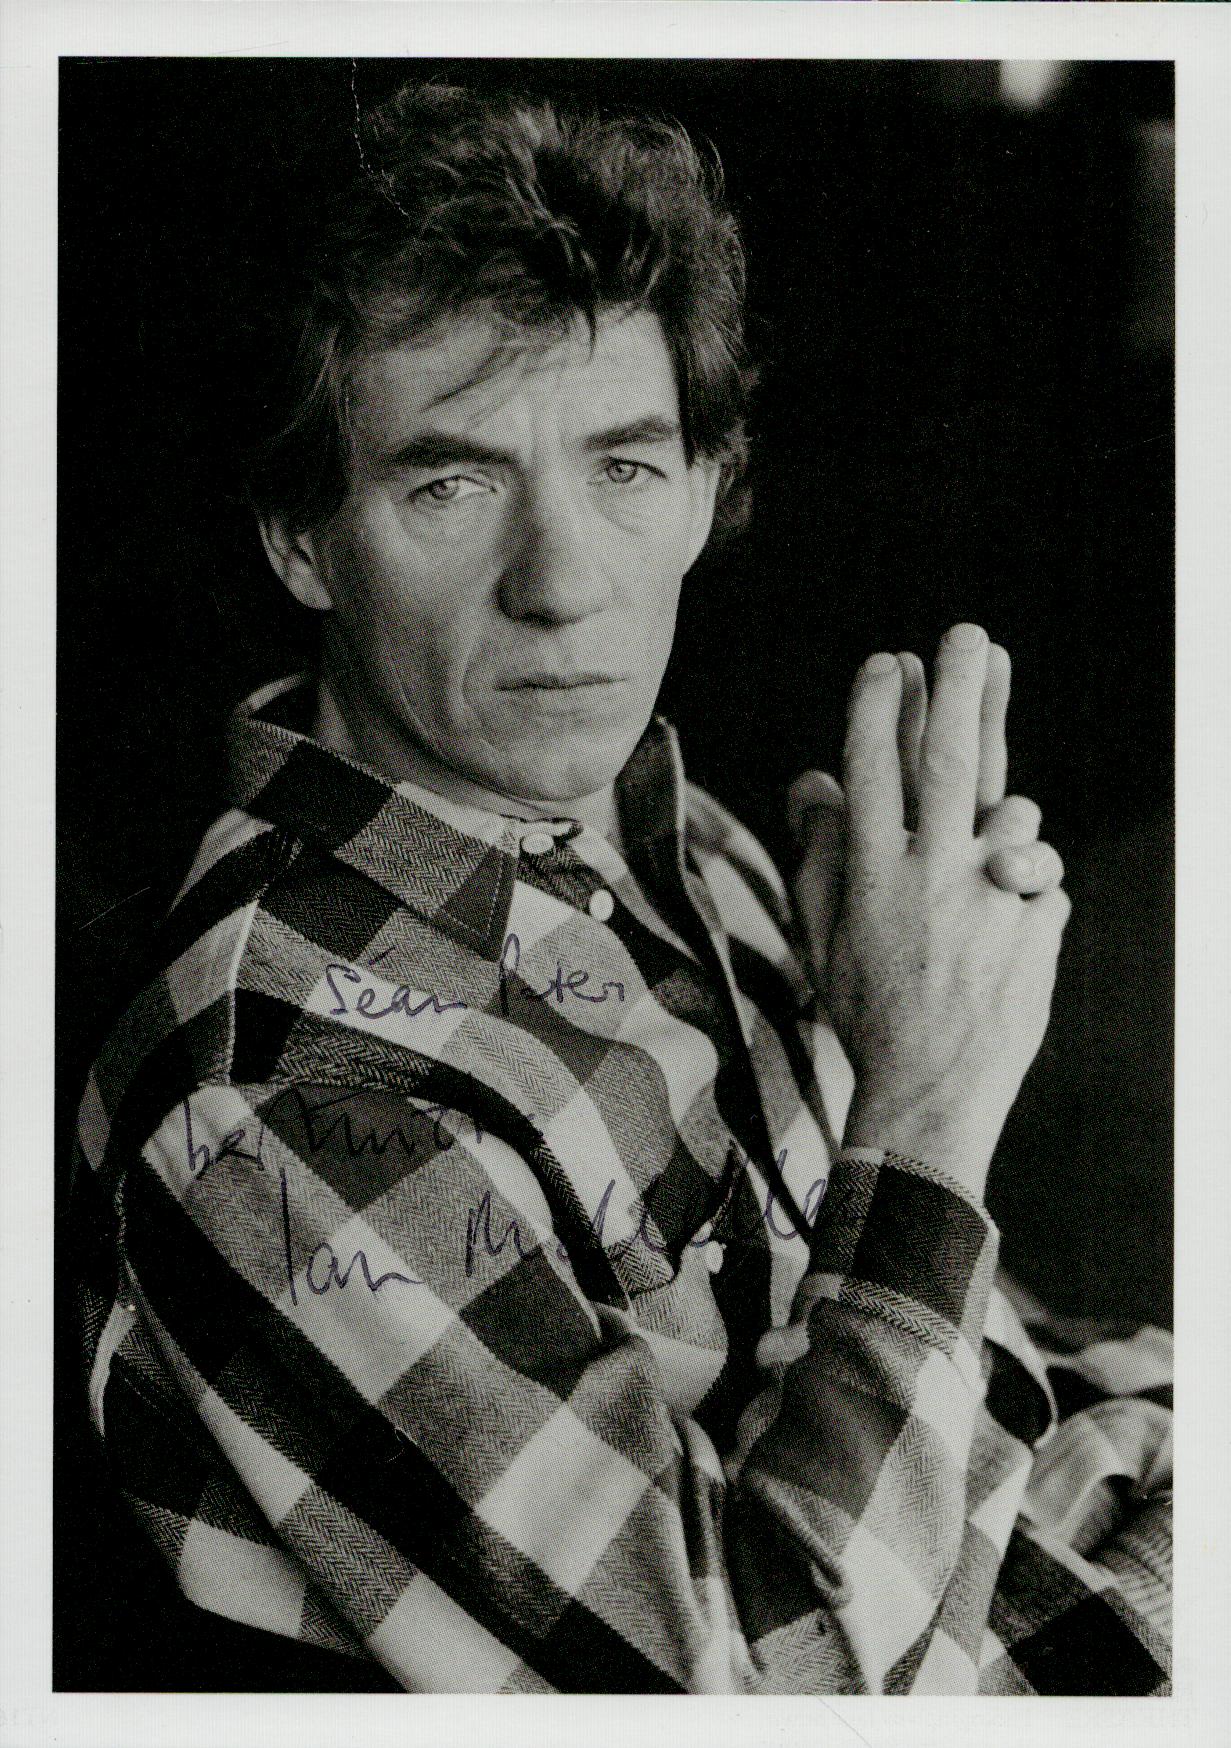 Sir Ian Mckellen CH CBE signed black & white photo Approx. Dedicated. 6x4 Inch. Is an English actor.